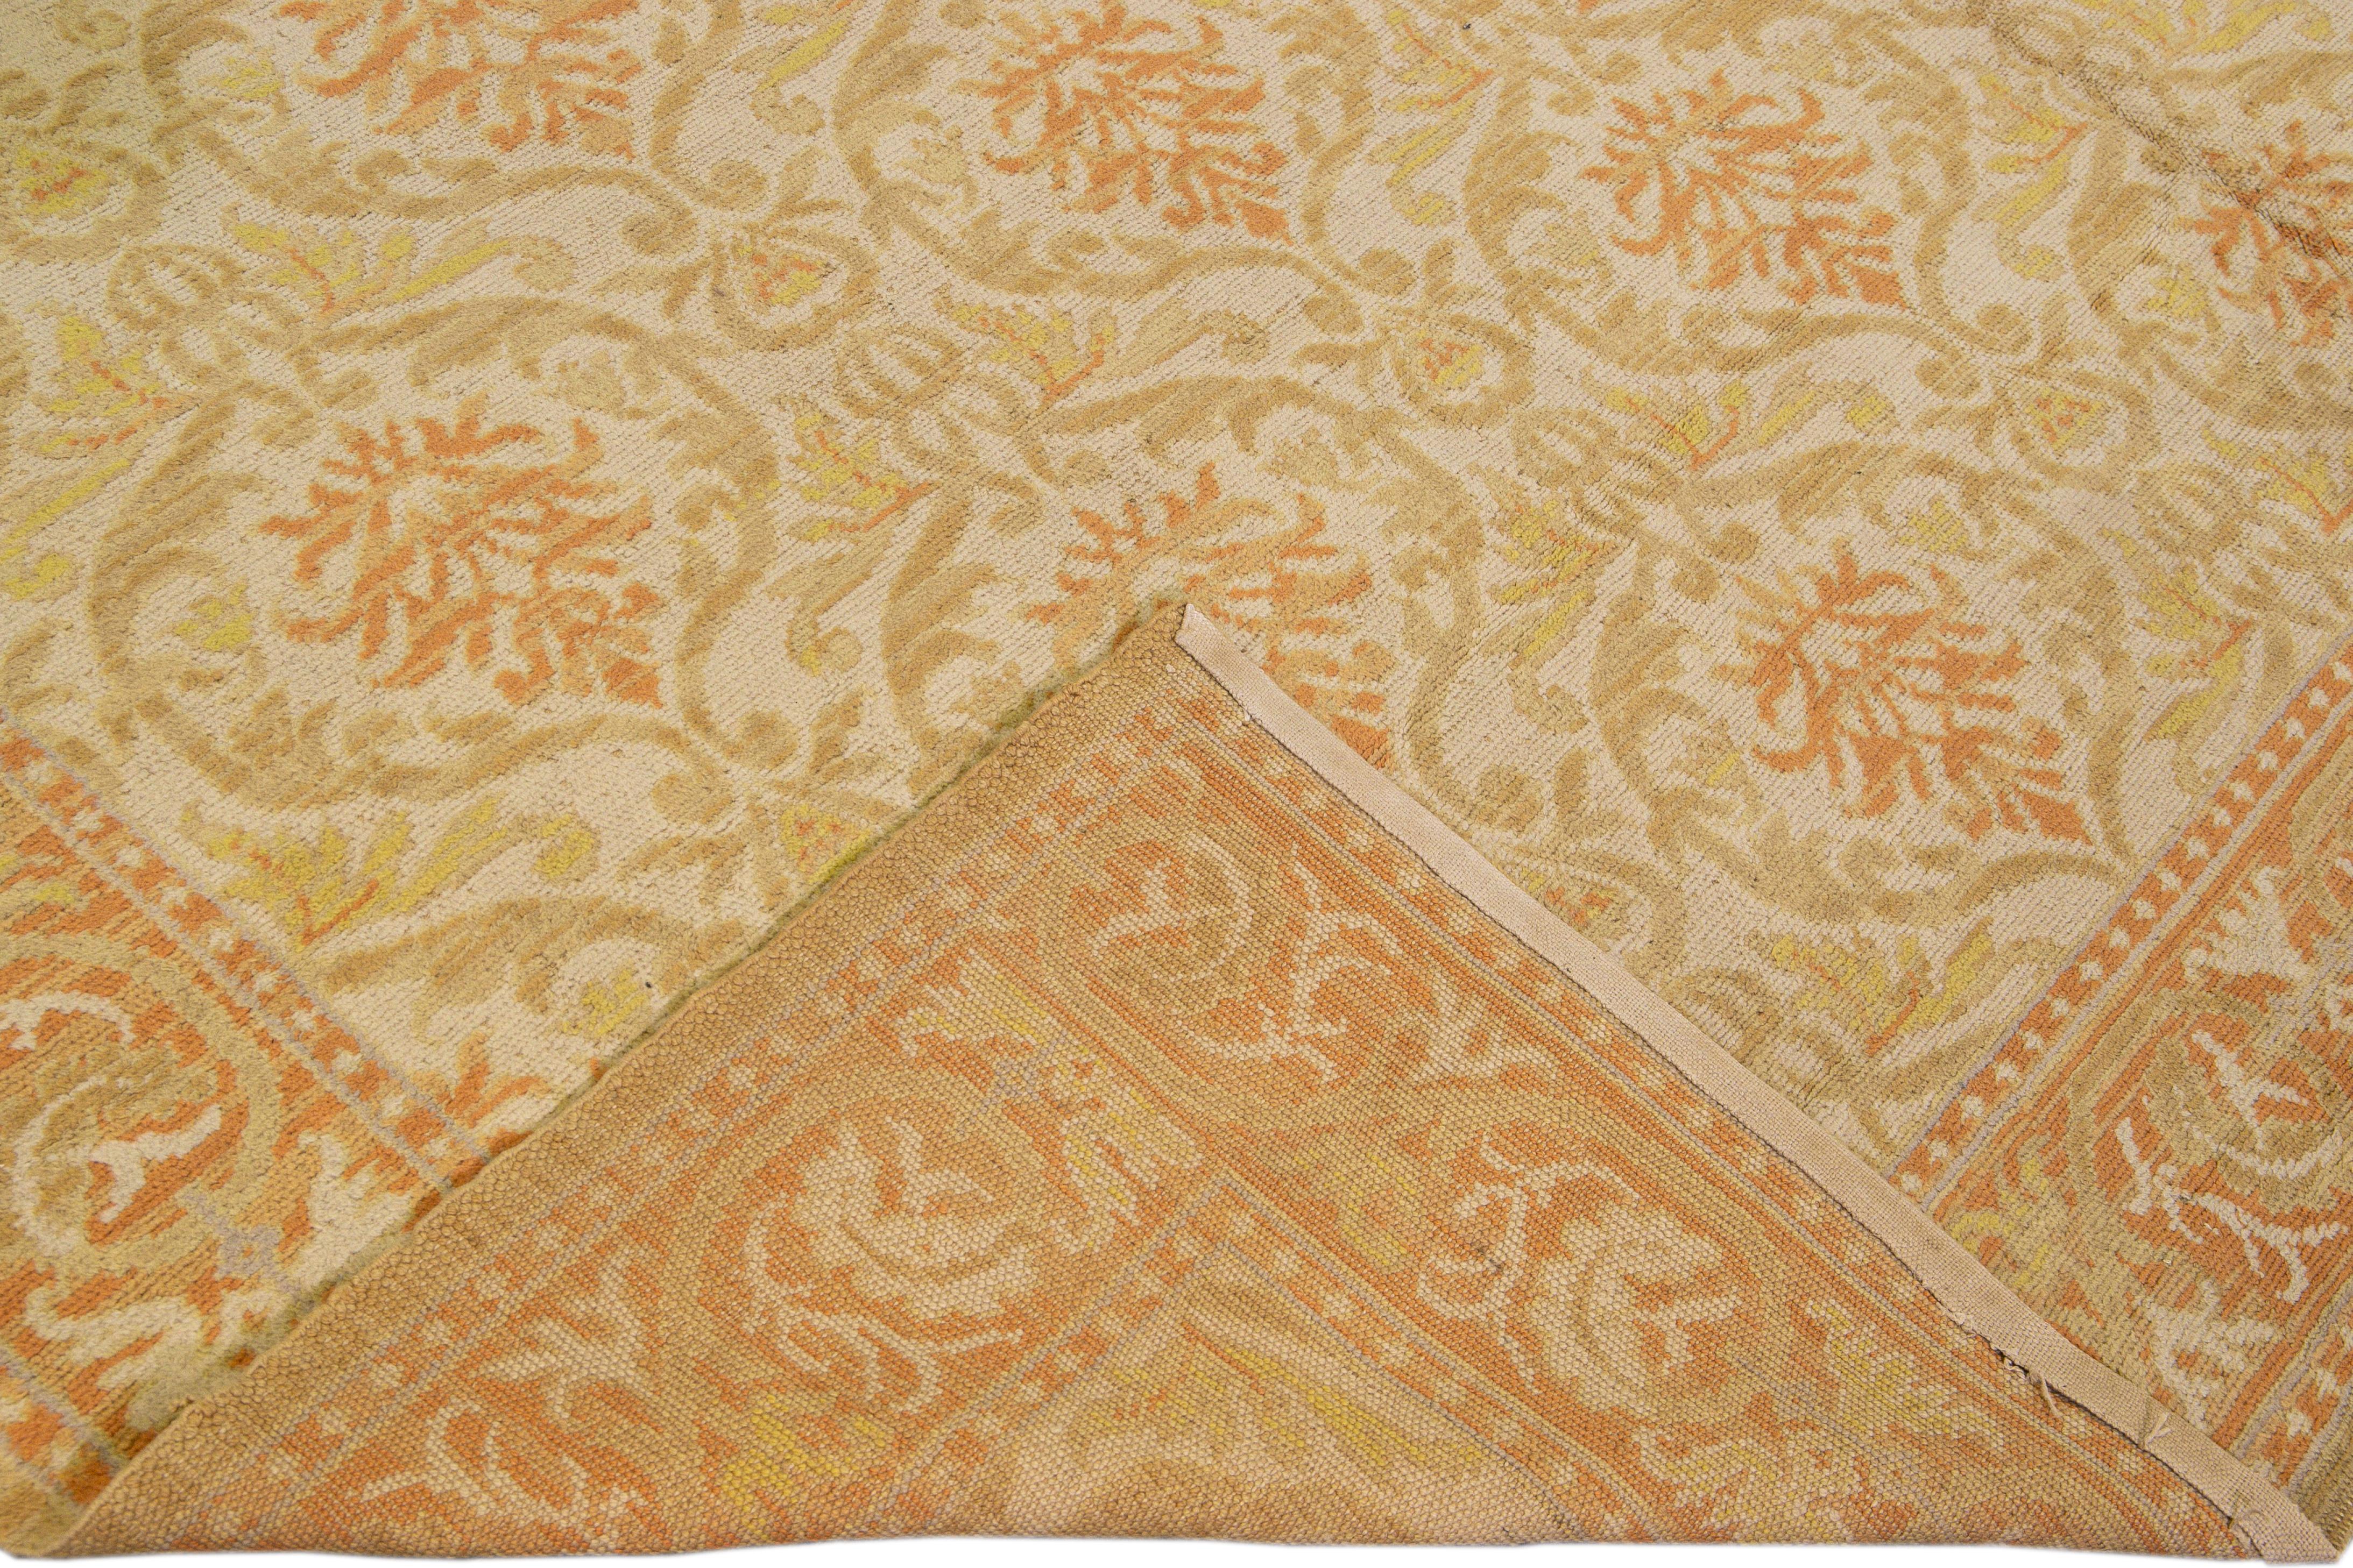 Beautiful vintage Spanish hand-knotted wool rug with the beige field. This Spanish rug has tan, yellow, and orange accents in an all-over geometric floral pattern design. 

This rug measures 10' x 17'7